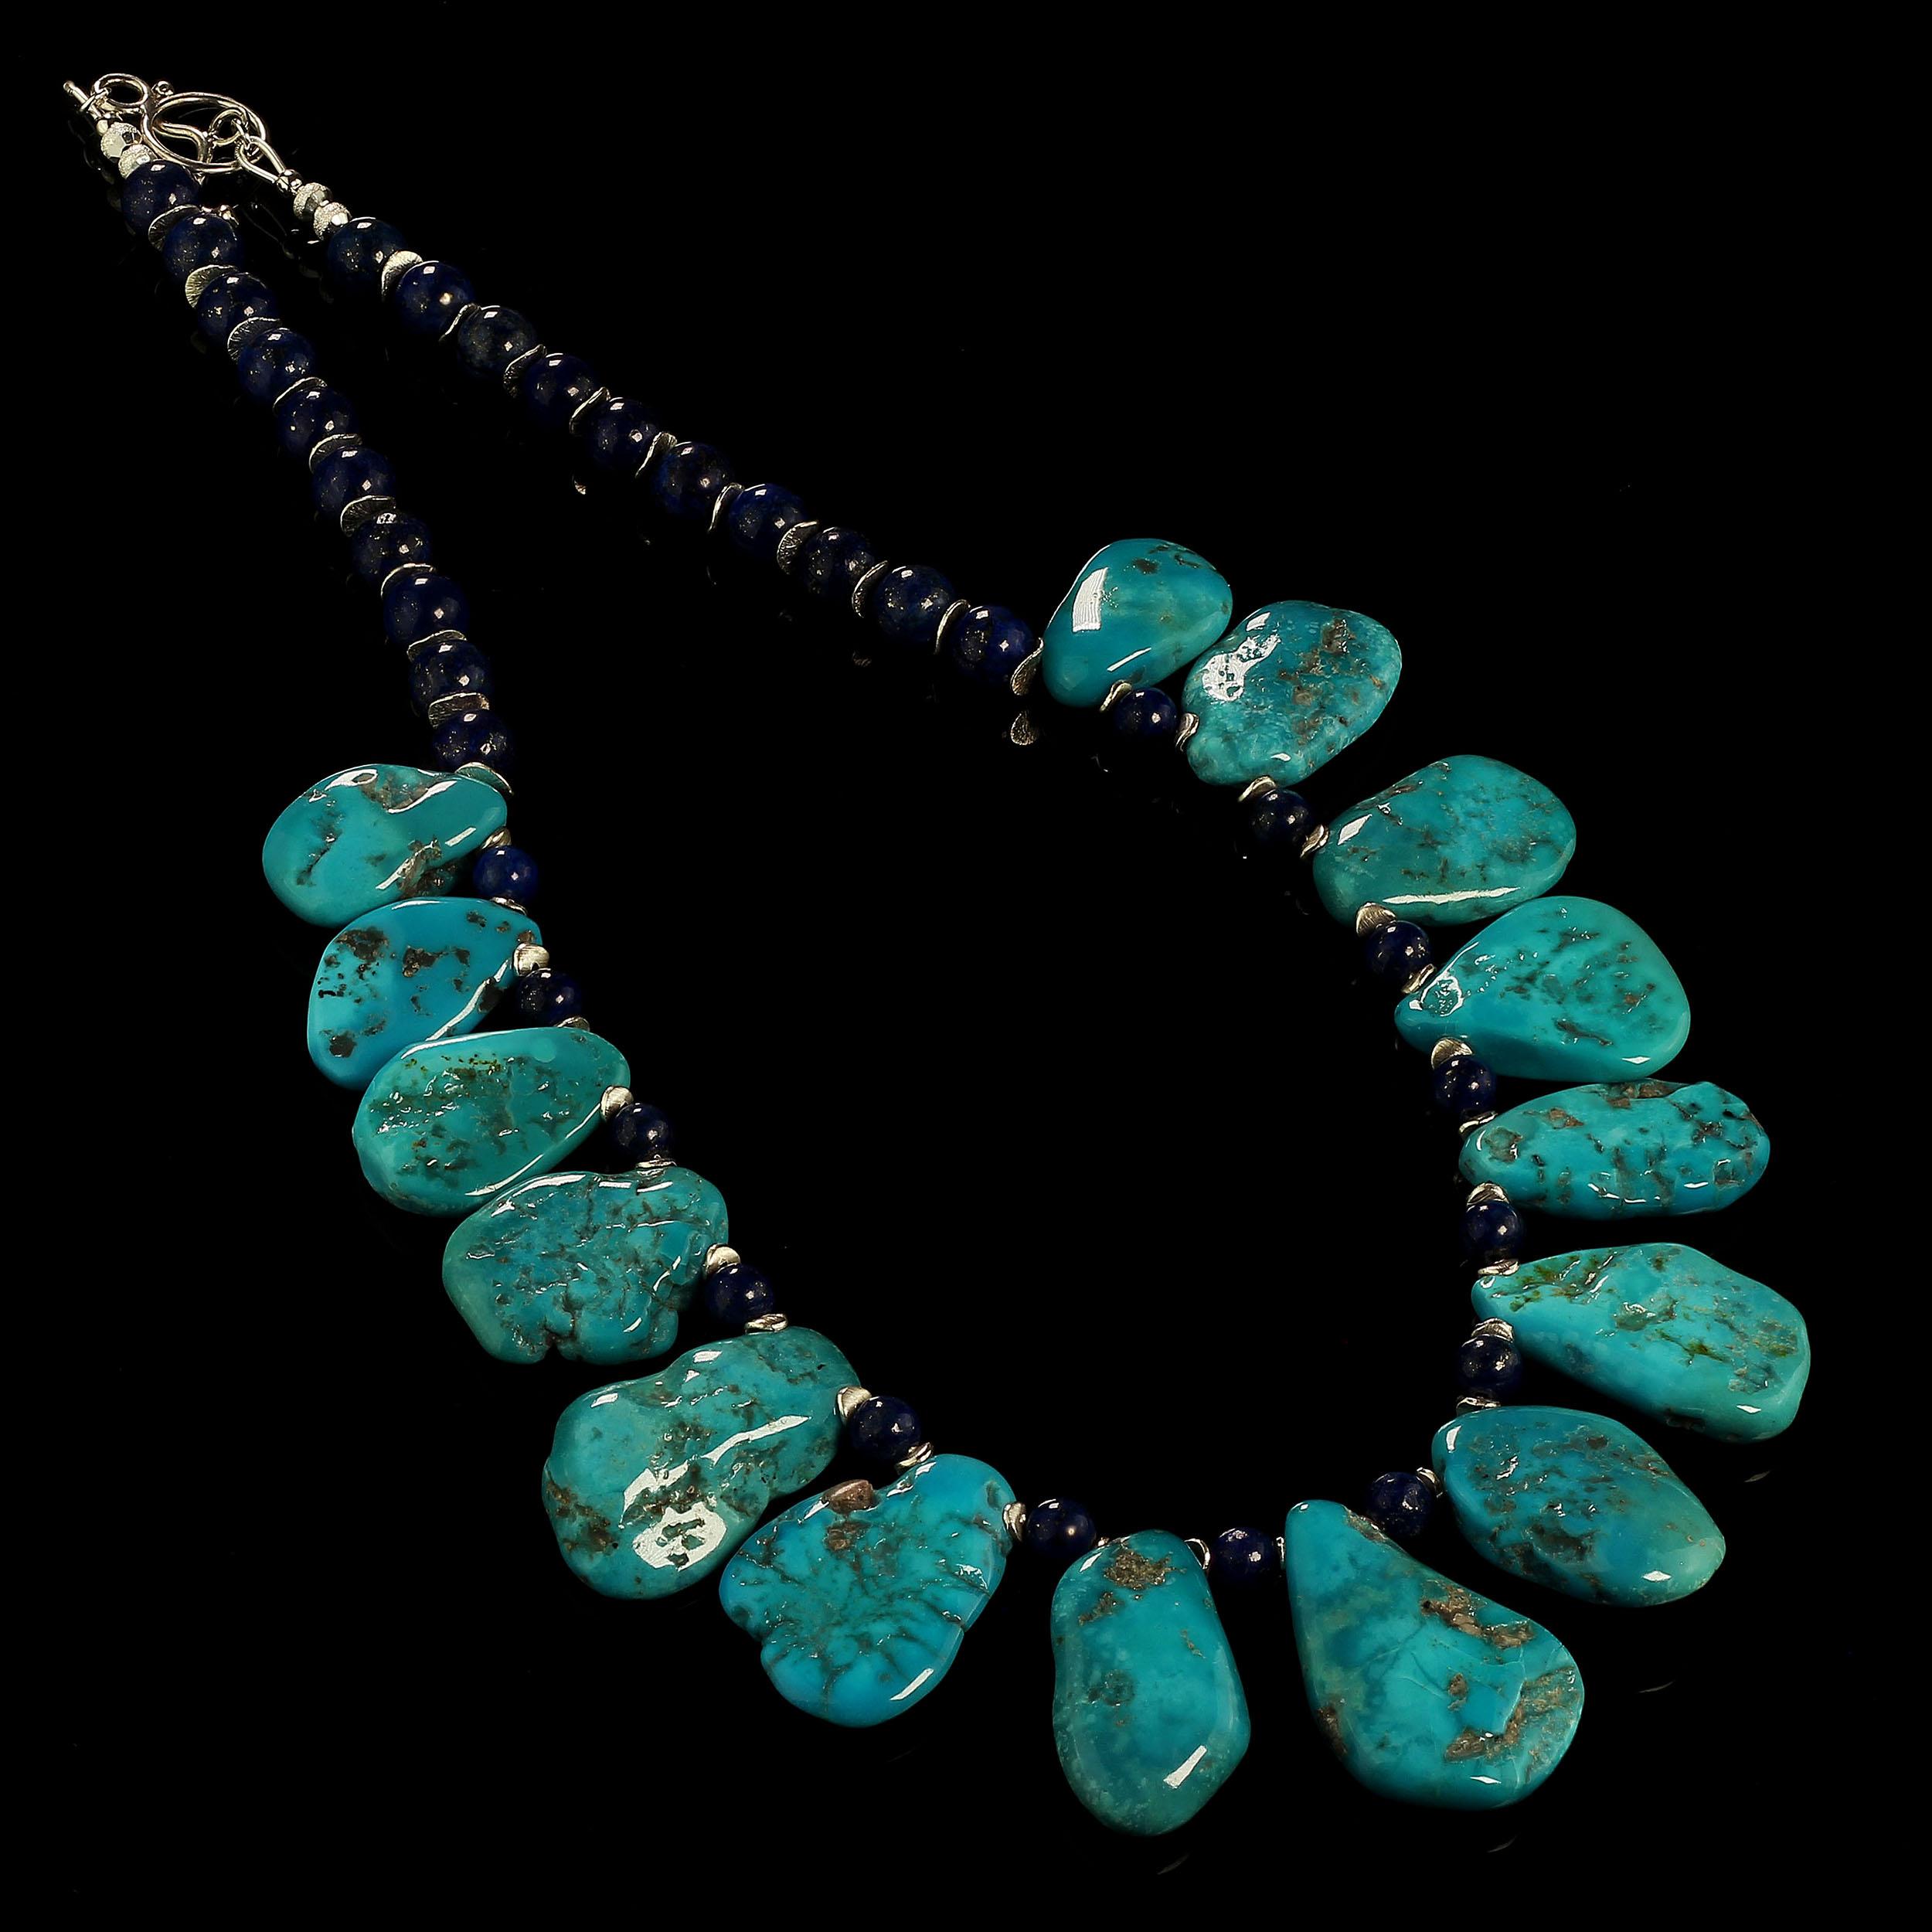 Spectacular necklace of Sleeping Beauty Turquoise tablets accented with Lapis Lazuli.  These gorgeous tablets glow with that unique world famous Sleeping Beauty look.  They range in size from 23 x 15 to 34 x 23 MM.  The Lapis Lazuli is 6 MM between